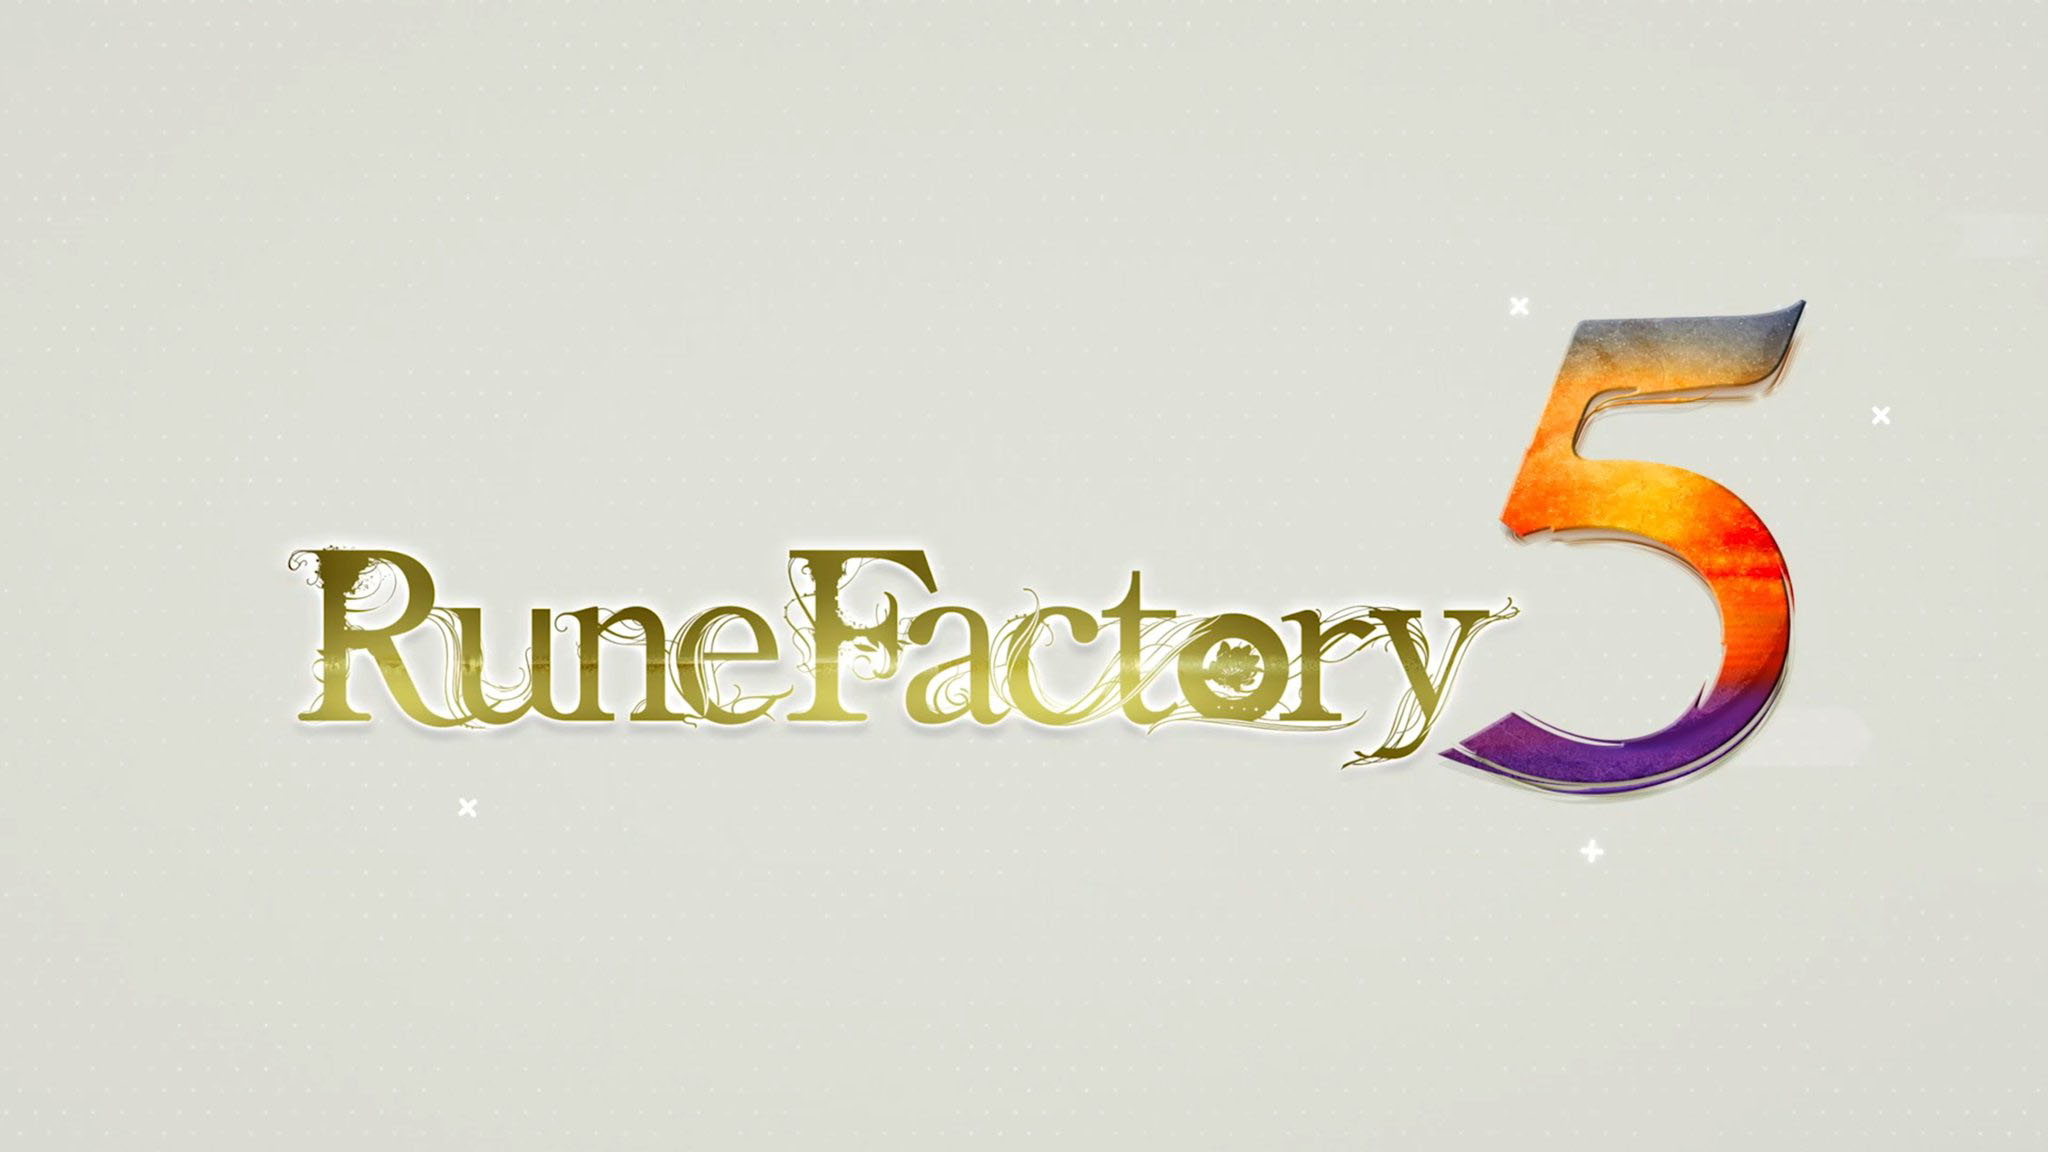 Marvelous: Rune Factory 5 Won’t Release Before April 2020, Company Discusses Restrictions on Sexual Content